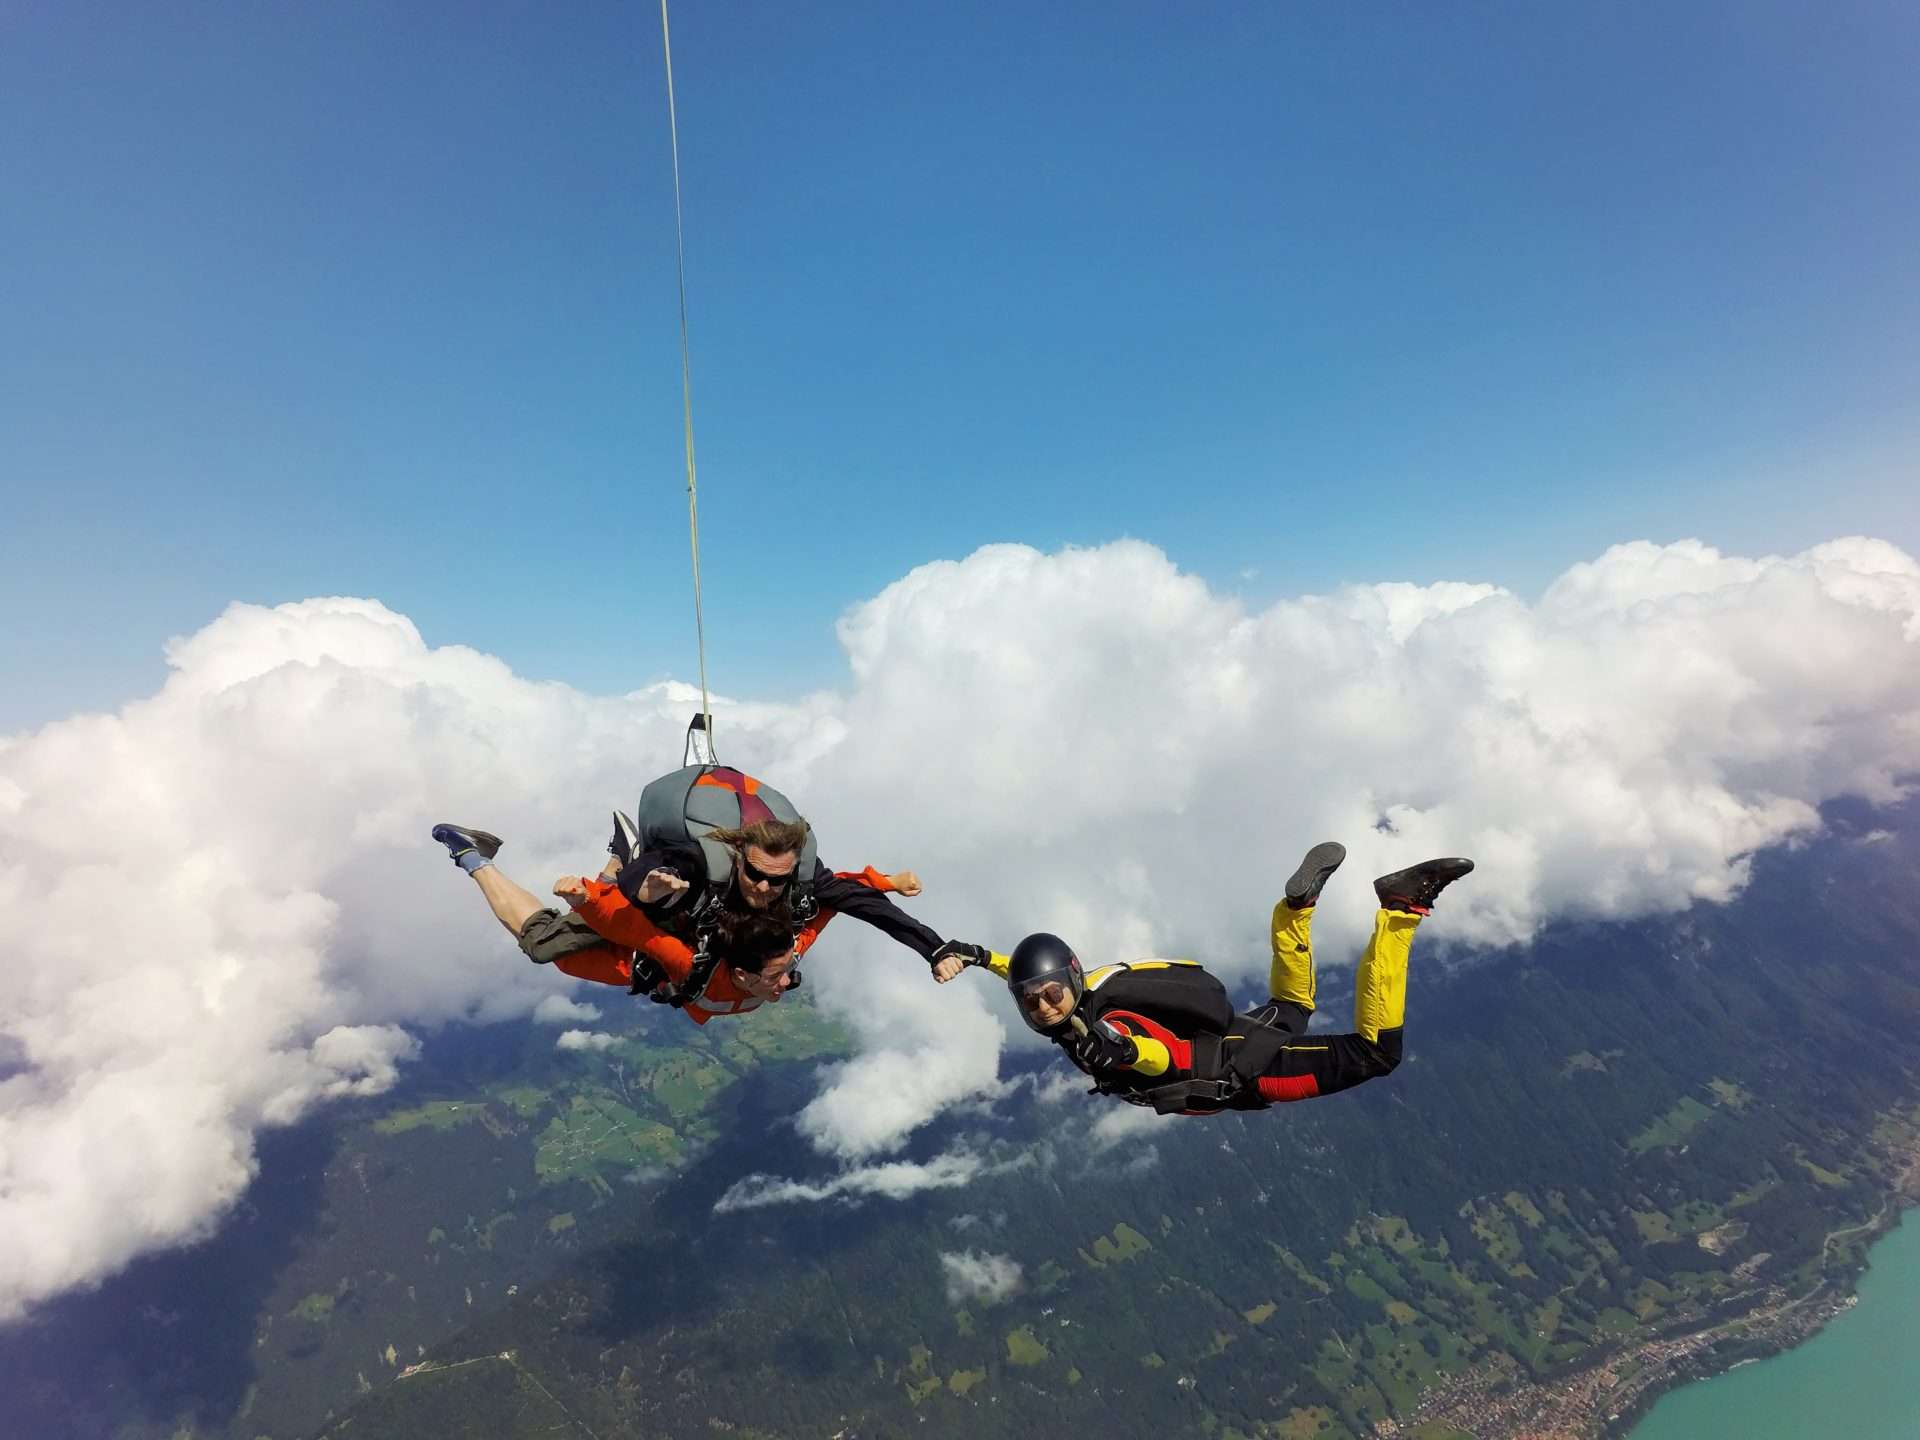 Two people in the air while skydiving